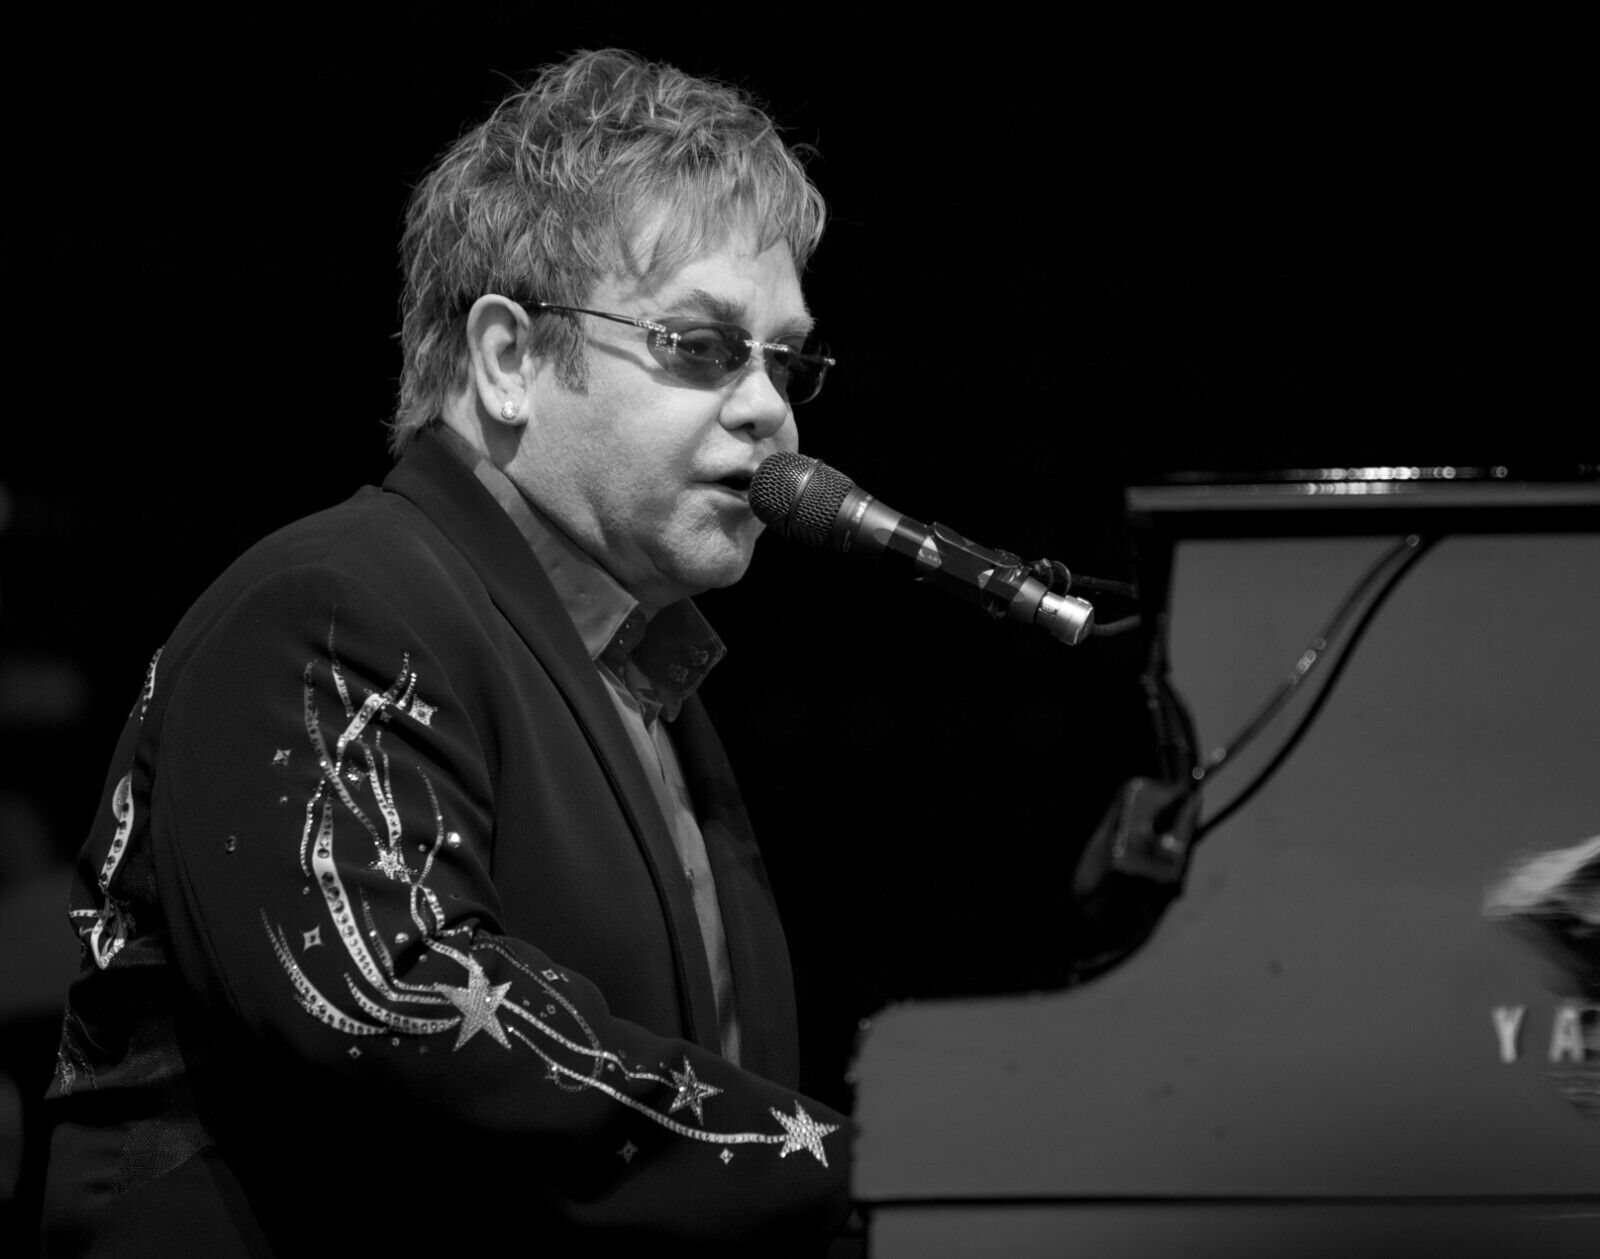 Iconic Singer & Pianist Sir Elton John Classic Poster Picture Photo Print 11x17